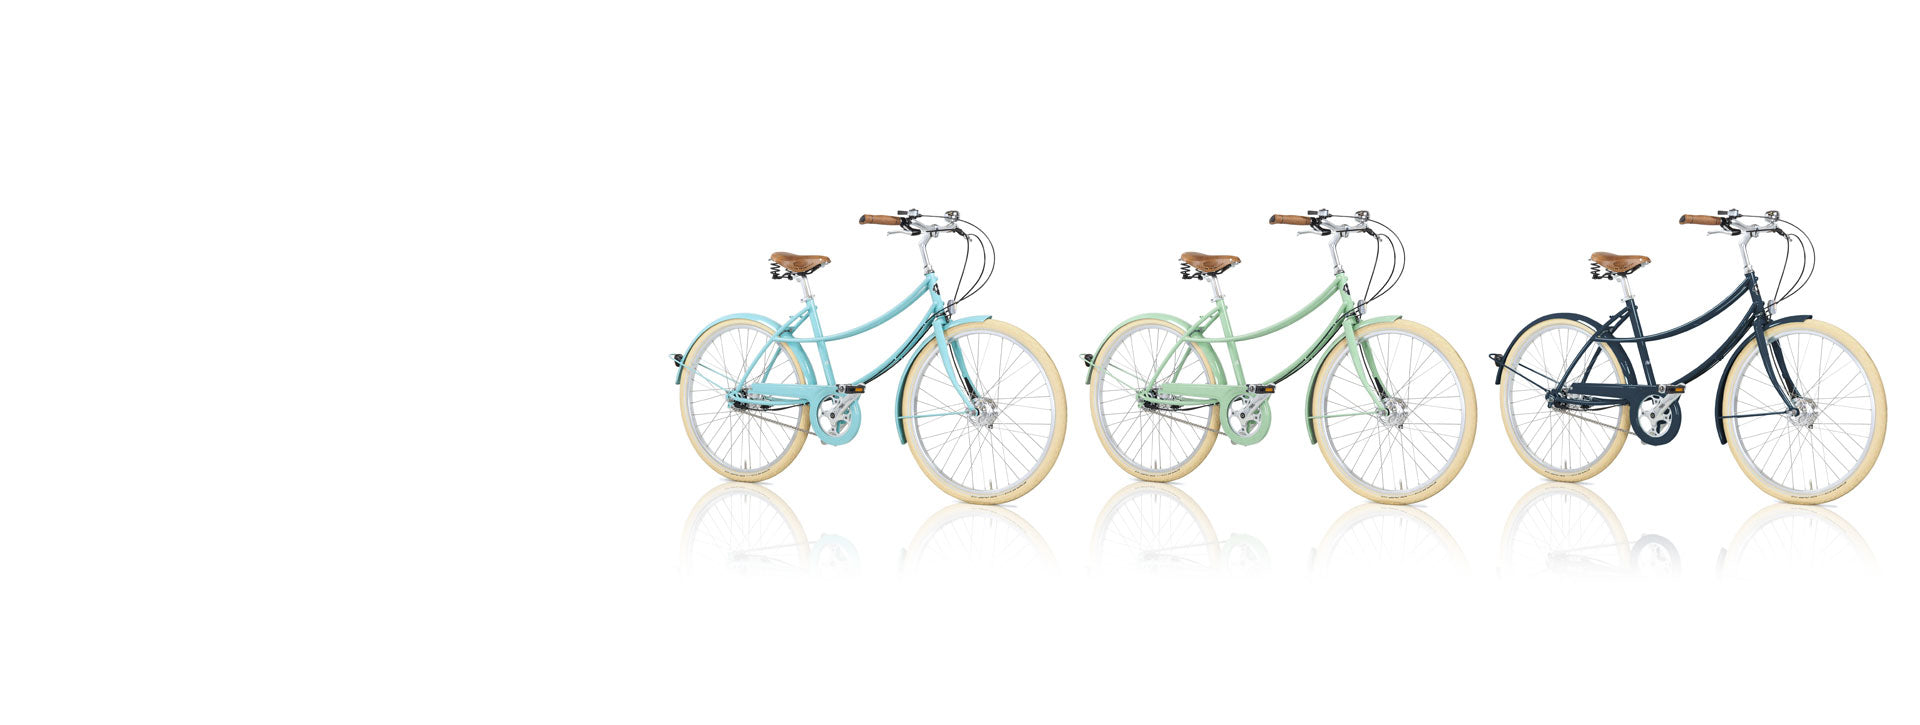 Three double loop frame bicycles, with leather saddles and cork grips. In light blue, mint and dark blue.